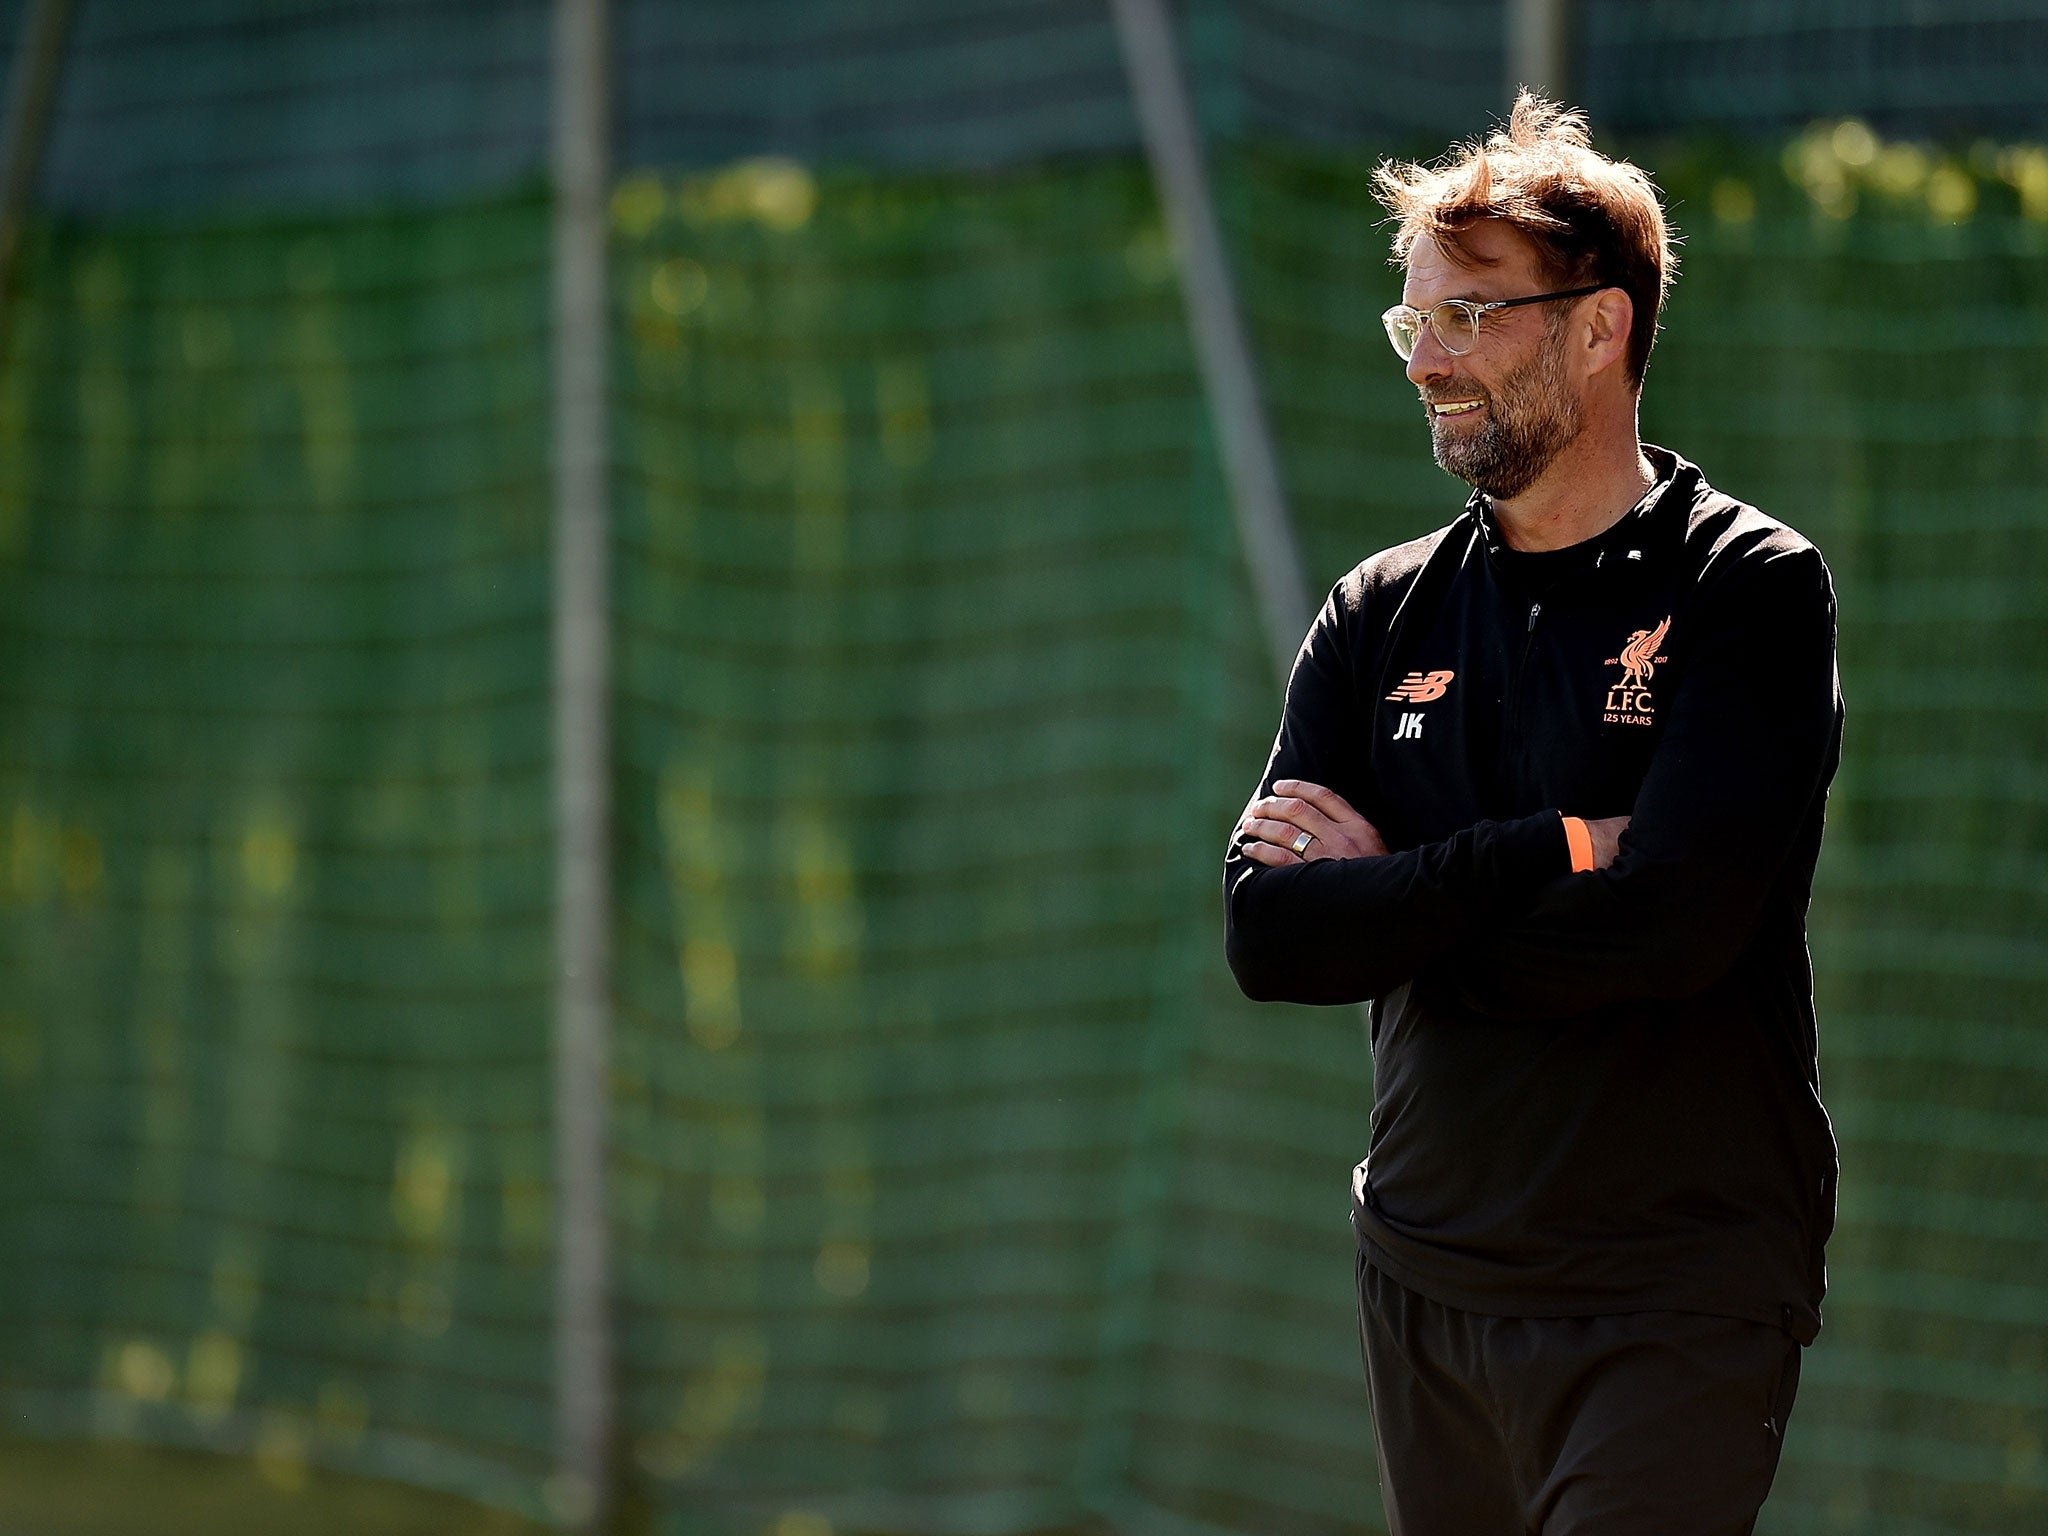 Liverpool manager Jurgen Klopp unfazed by Real Madrid&apos;s status as favourites ahead of Champions League final